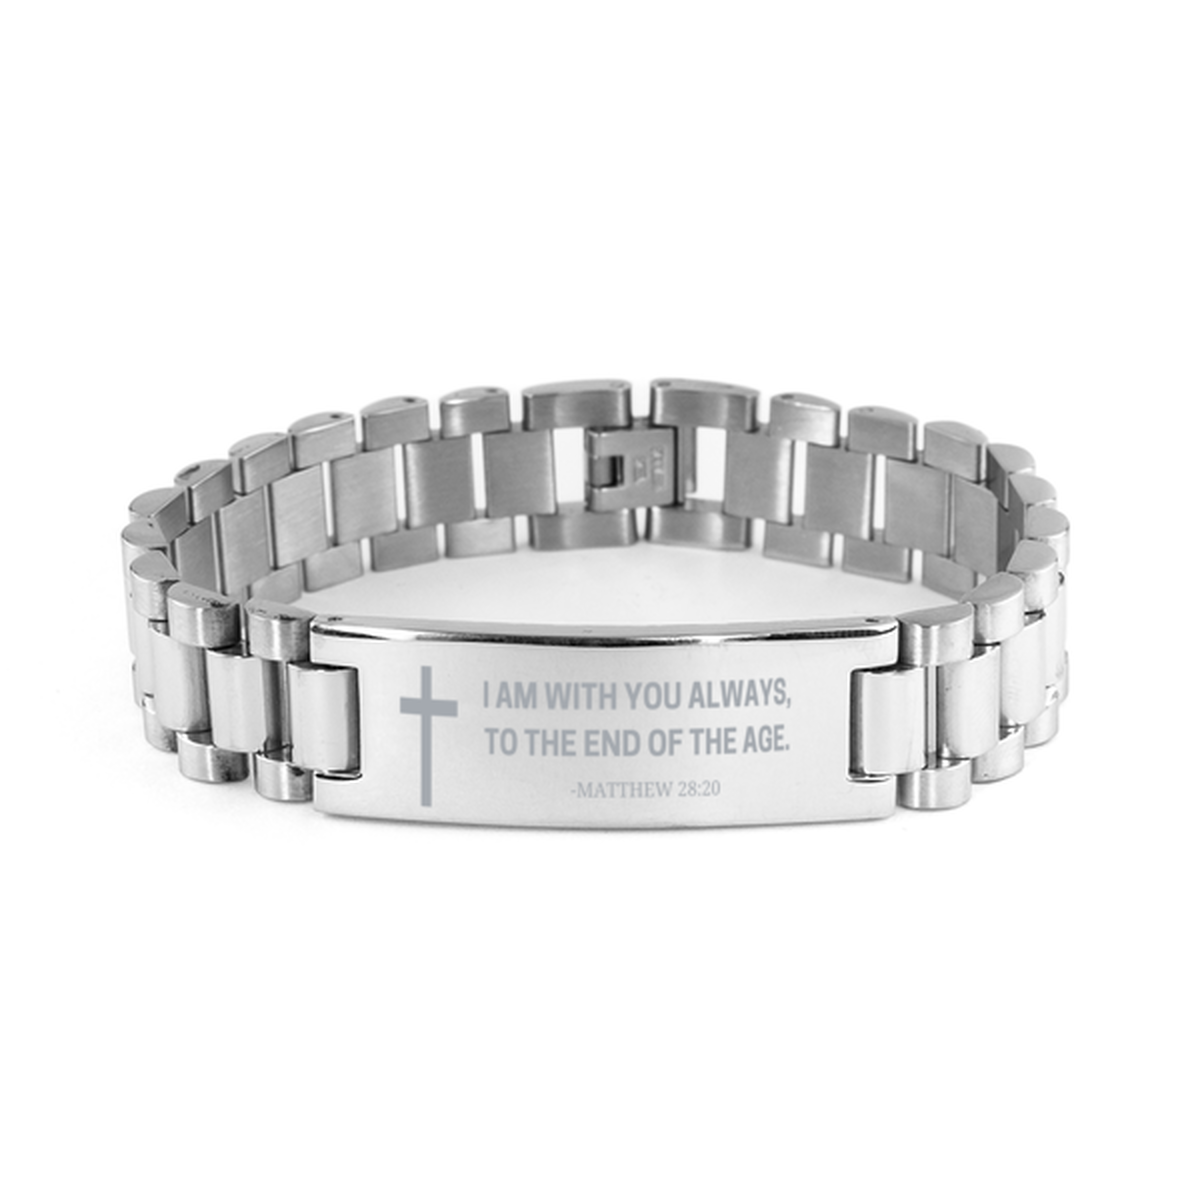 Baptism Gifts For Teenage Boys Girls, Christian Bible Verse Ladder Stainless Steel Bracelet, I am with you always, Catholic Confirmation Gifts for Son, Godson, Grandson, Nephew